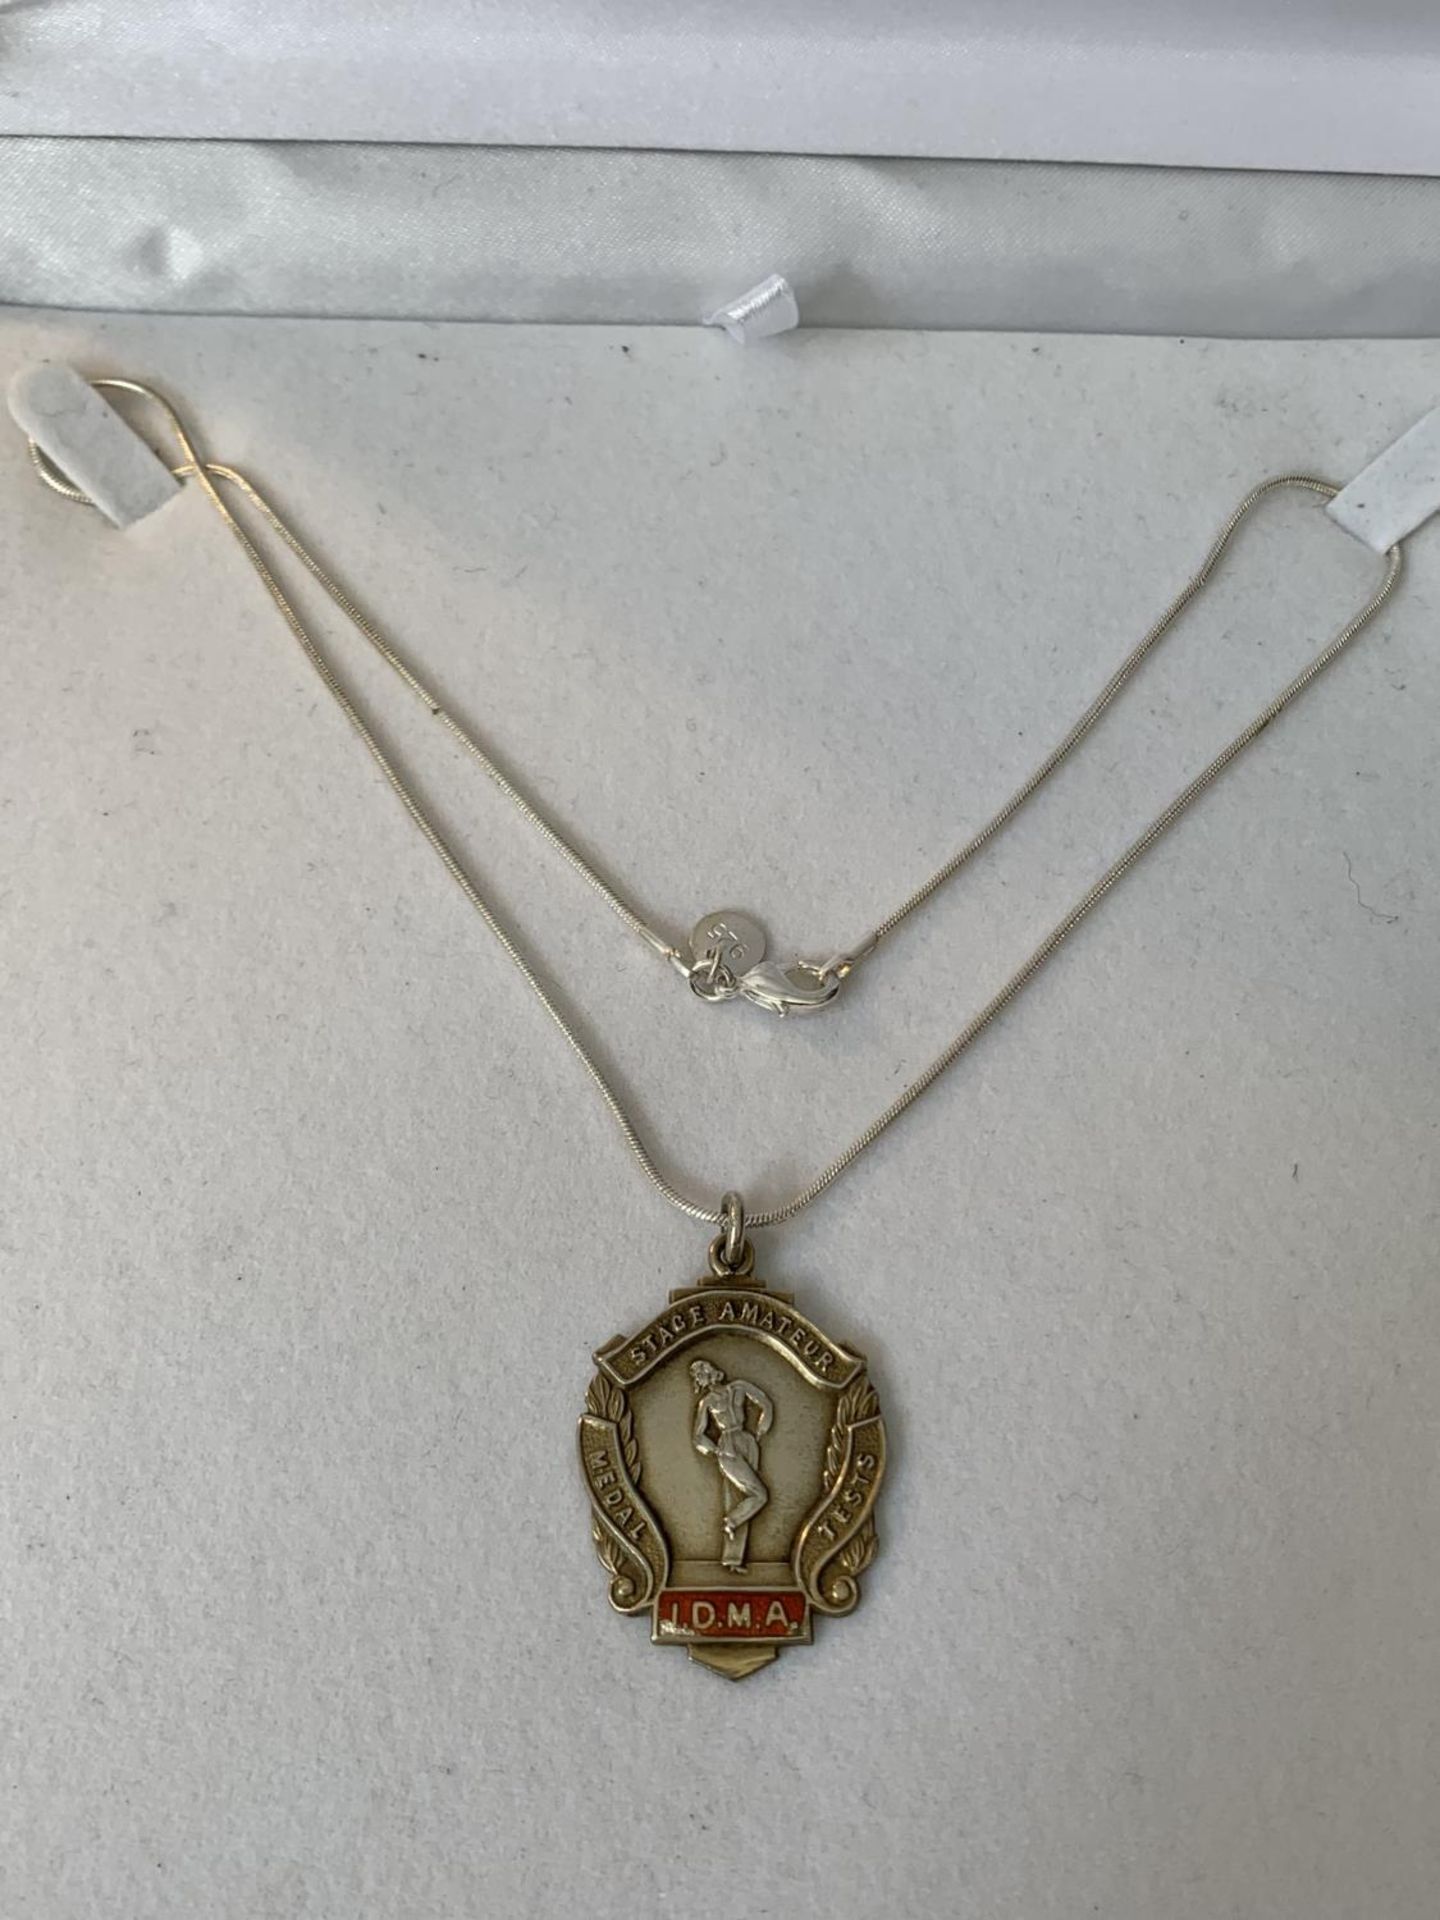 A SILVER NECKLACE WITH A HALLMARKED BIRMINGHAM SILVER DANCE MEDAL IN A PRESENTATION BOX